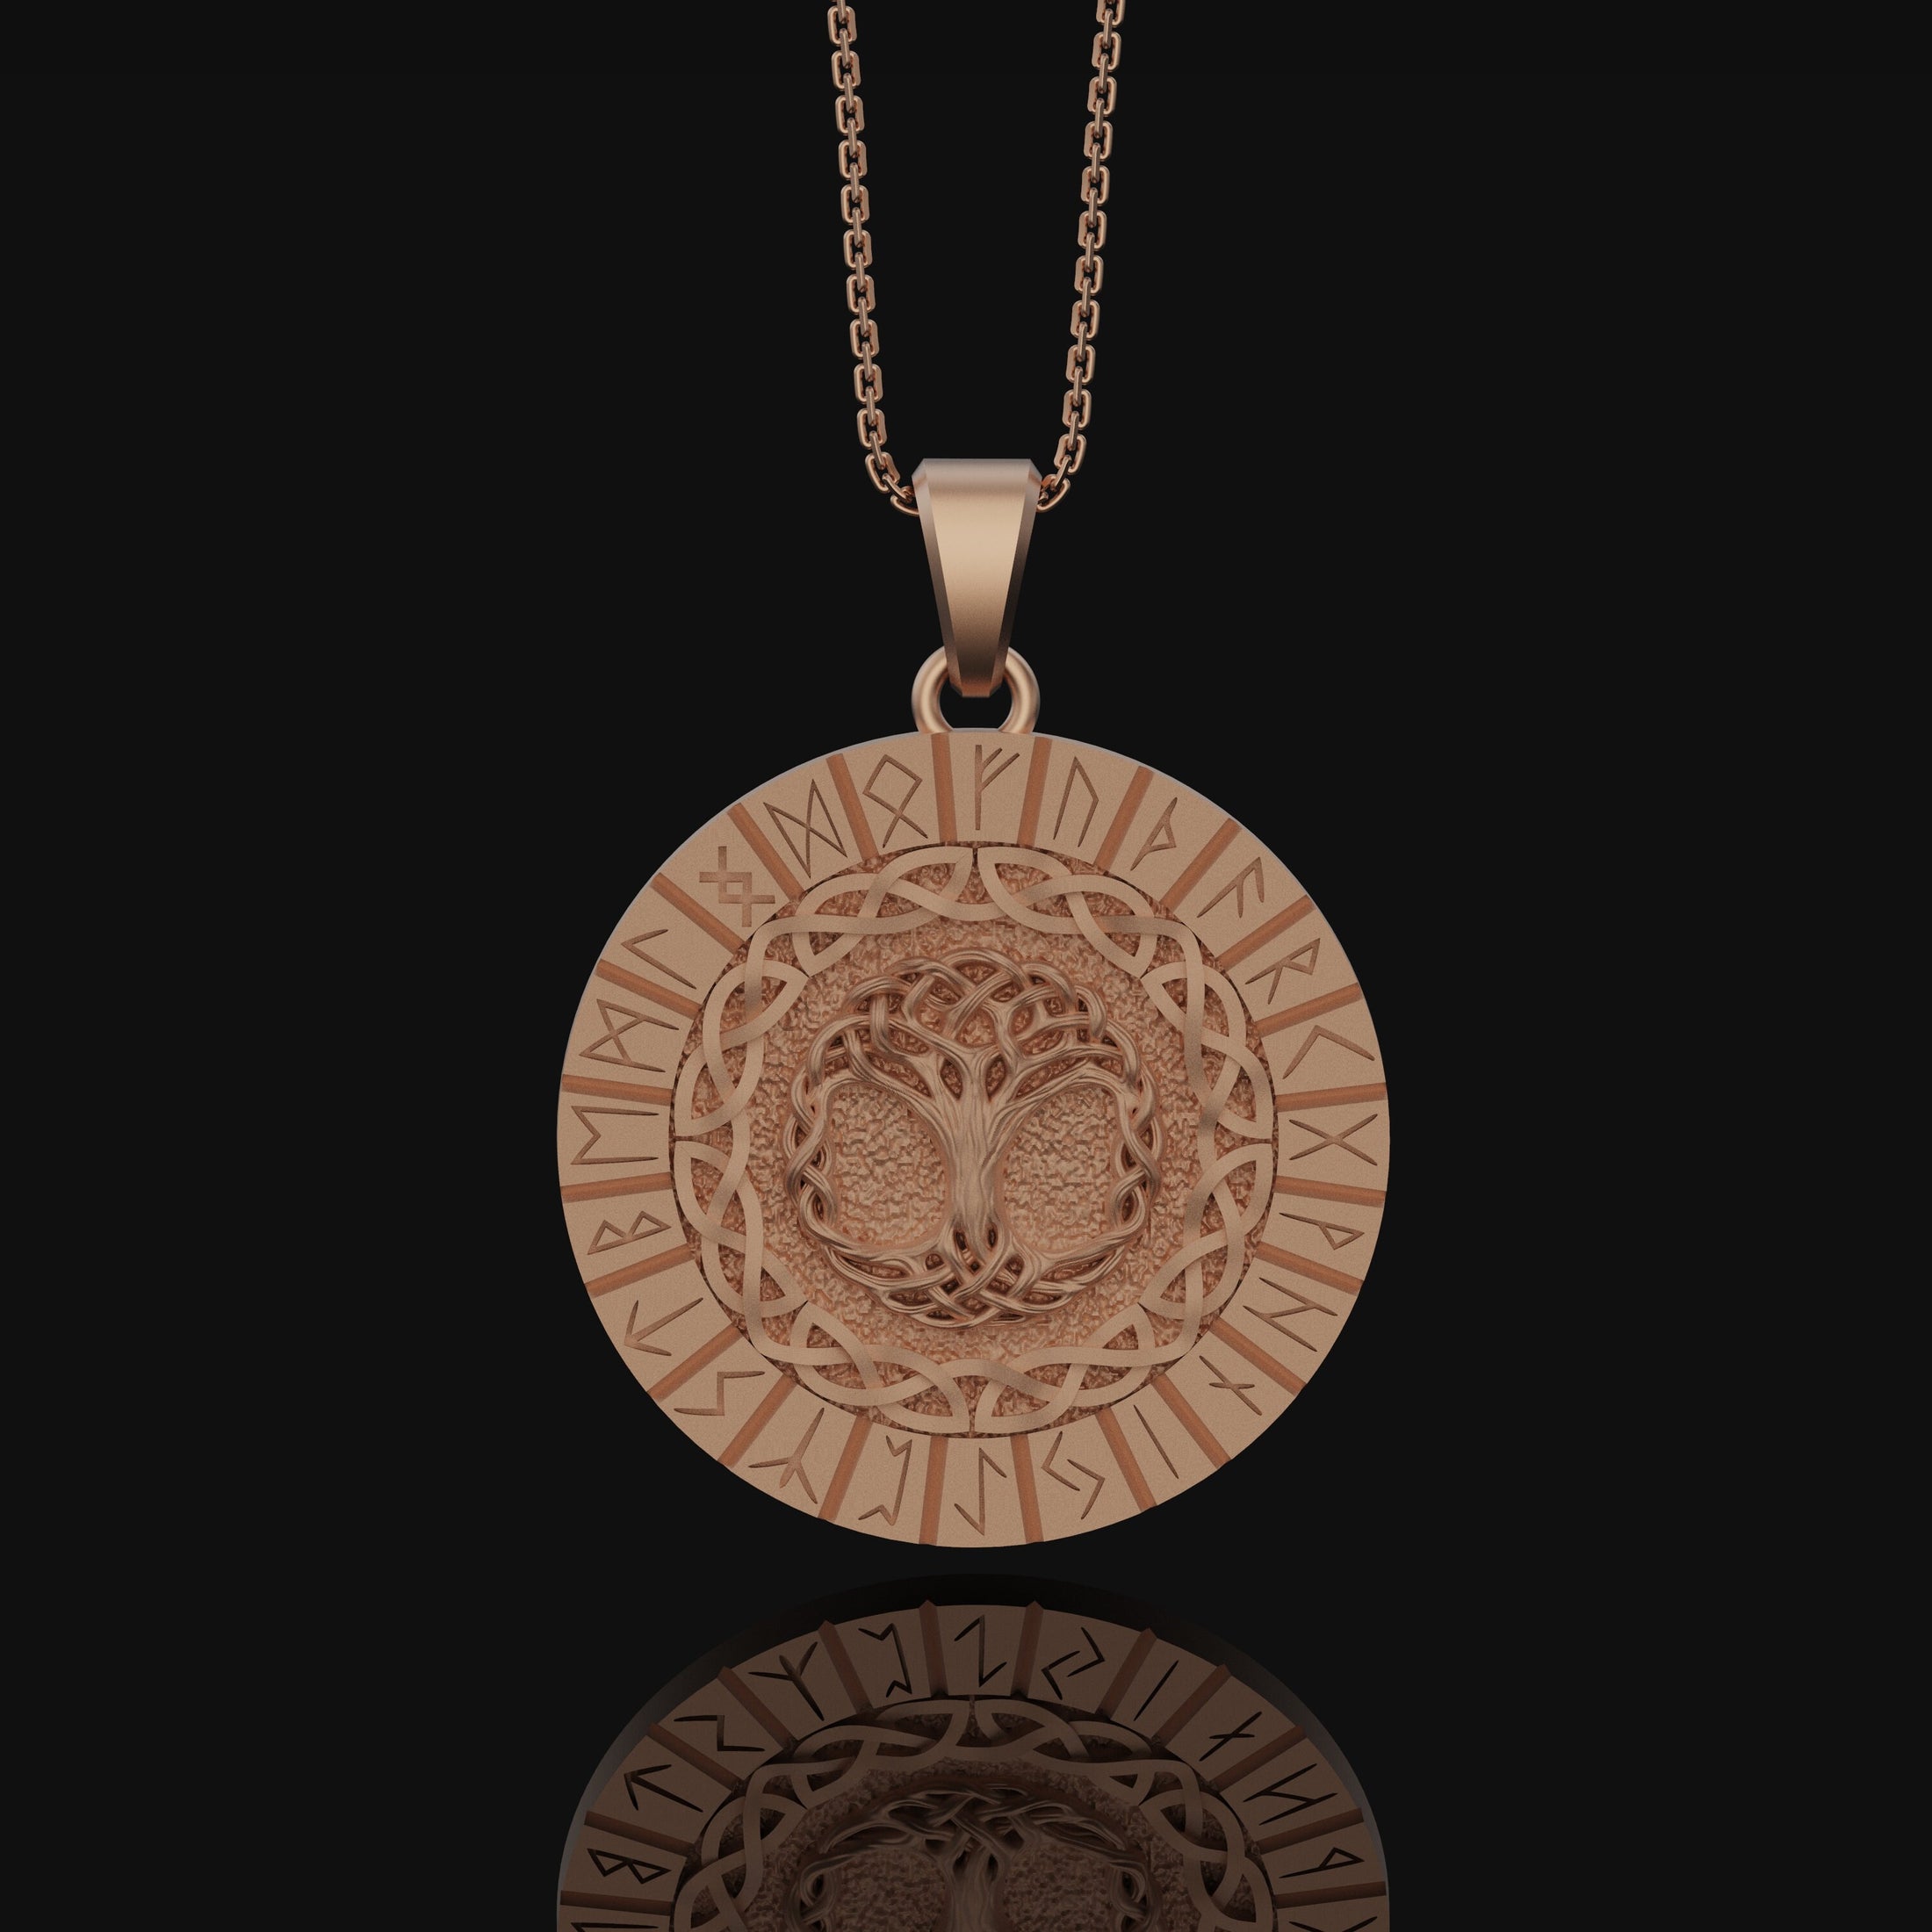 Tree Of Life Pendant, Yggdrasil Necklace, Christmas Gift, Norse, Protection Amulet, Pagan, Celtic Knot, Viking Jewelry, Runic Alphabet Rose Gold Matte